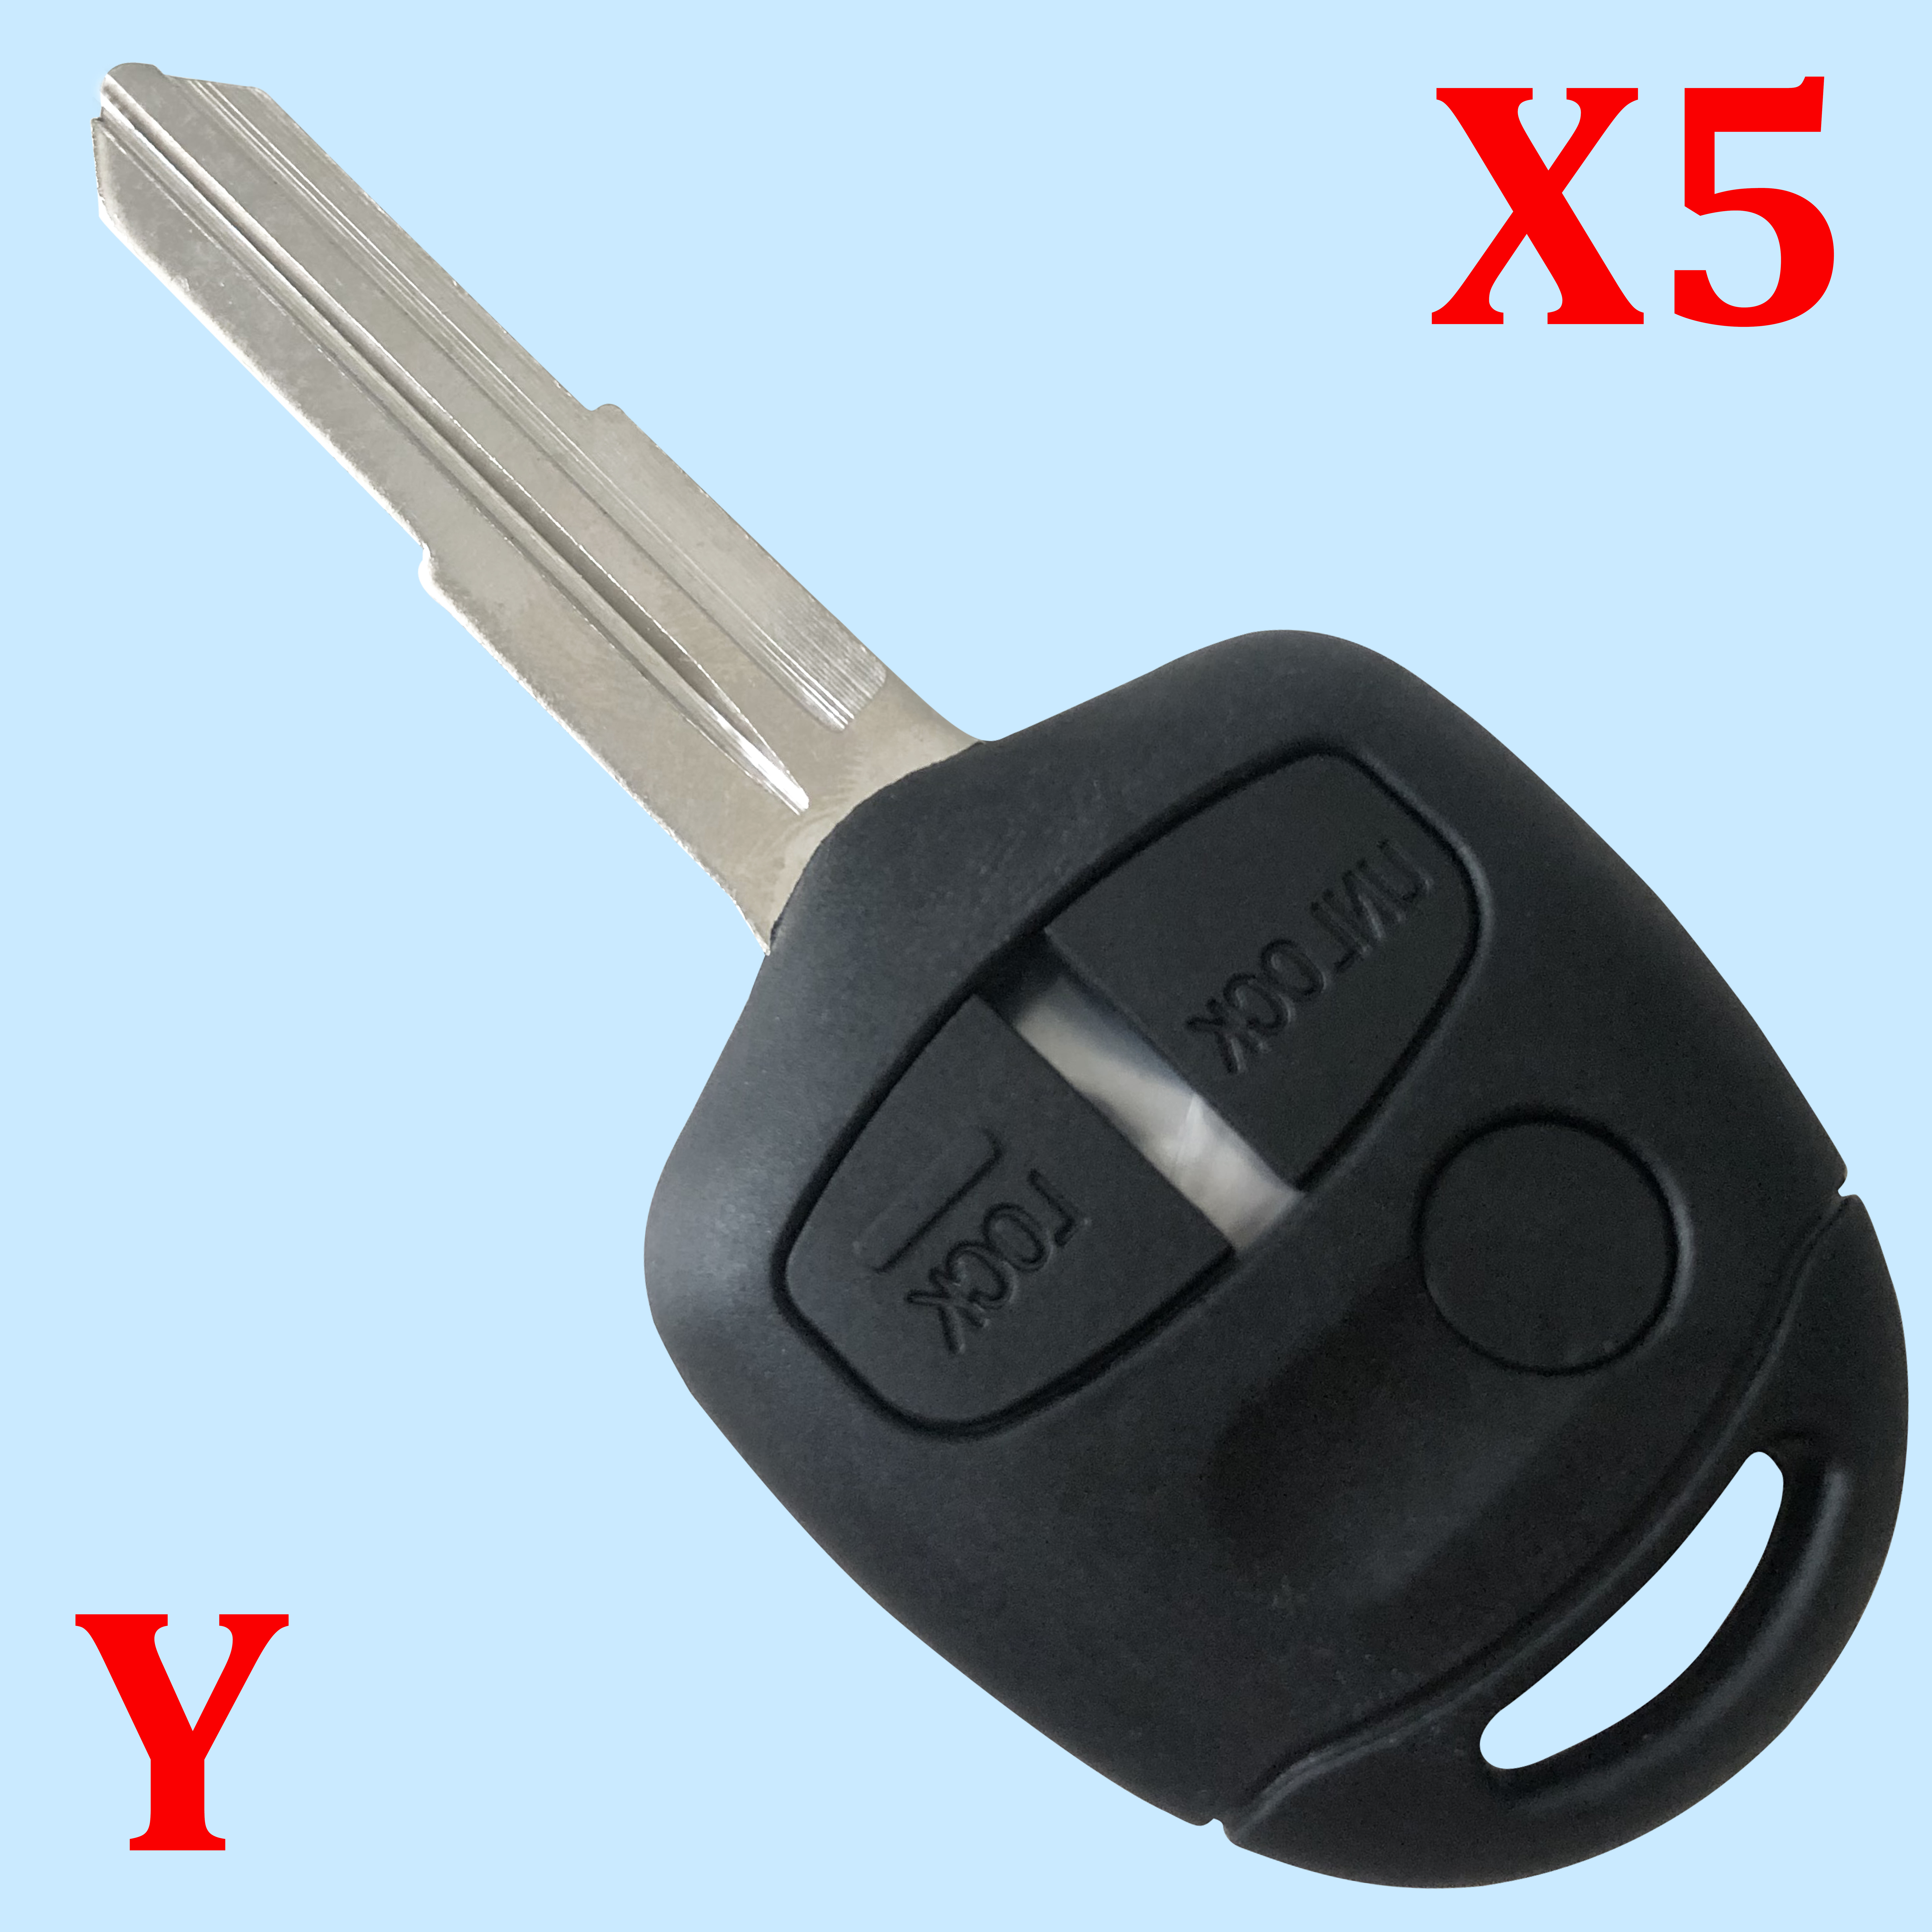 3 Buttons Remote Key Shell for Mitsubishi - Pack of 5